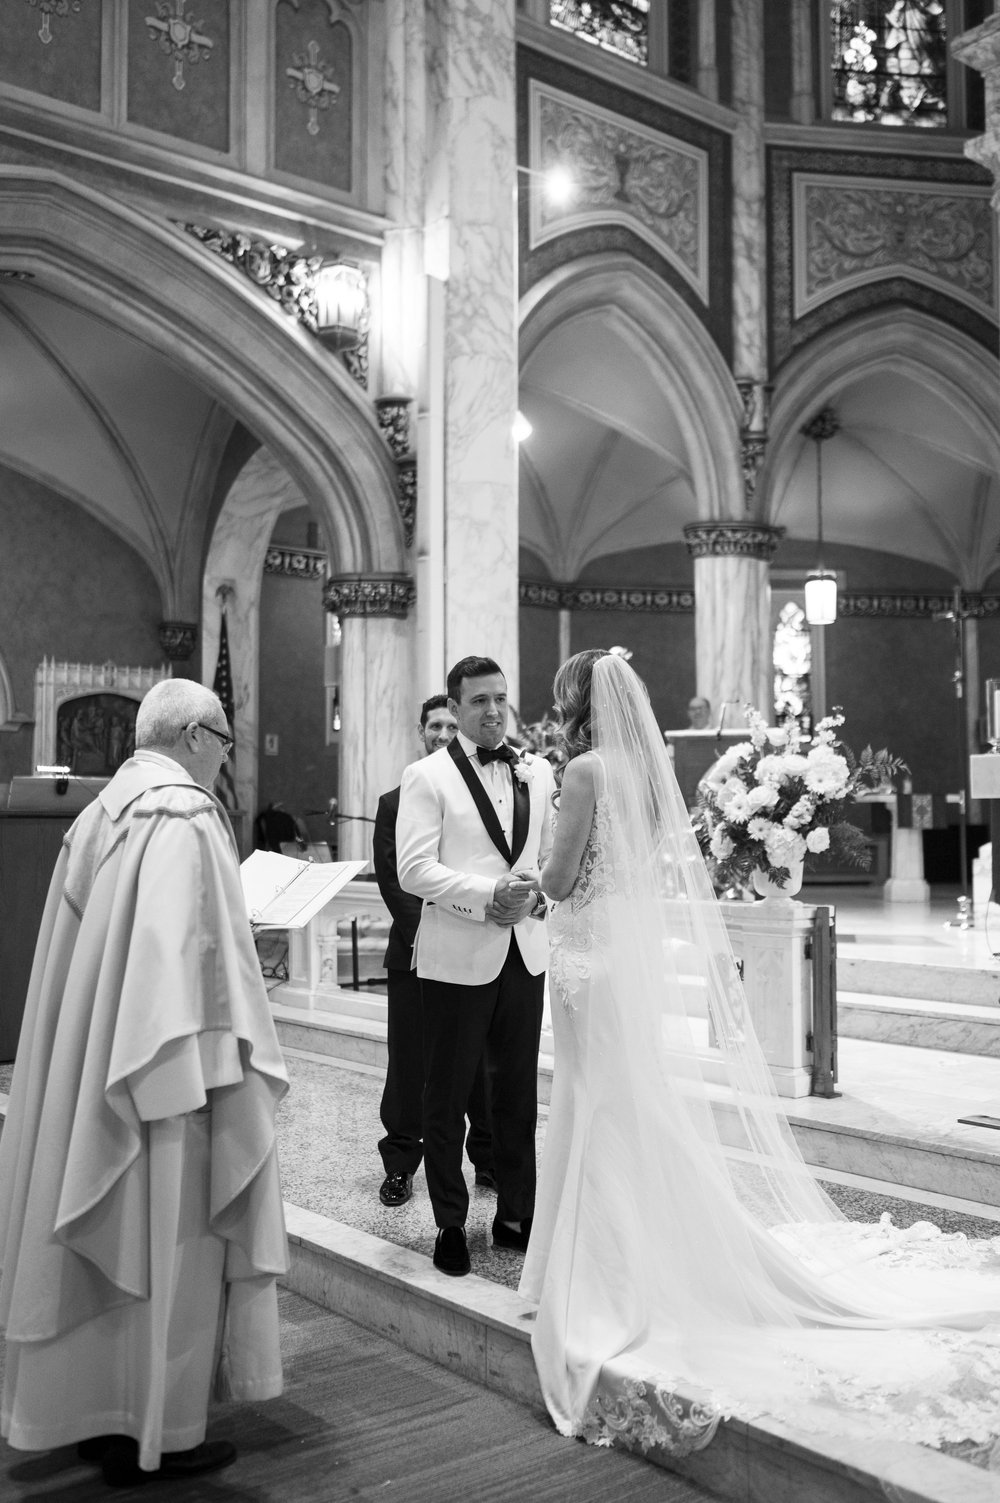 wedding ceremony photos in church with bride and groom